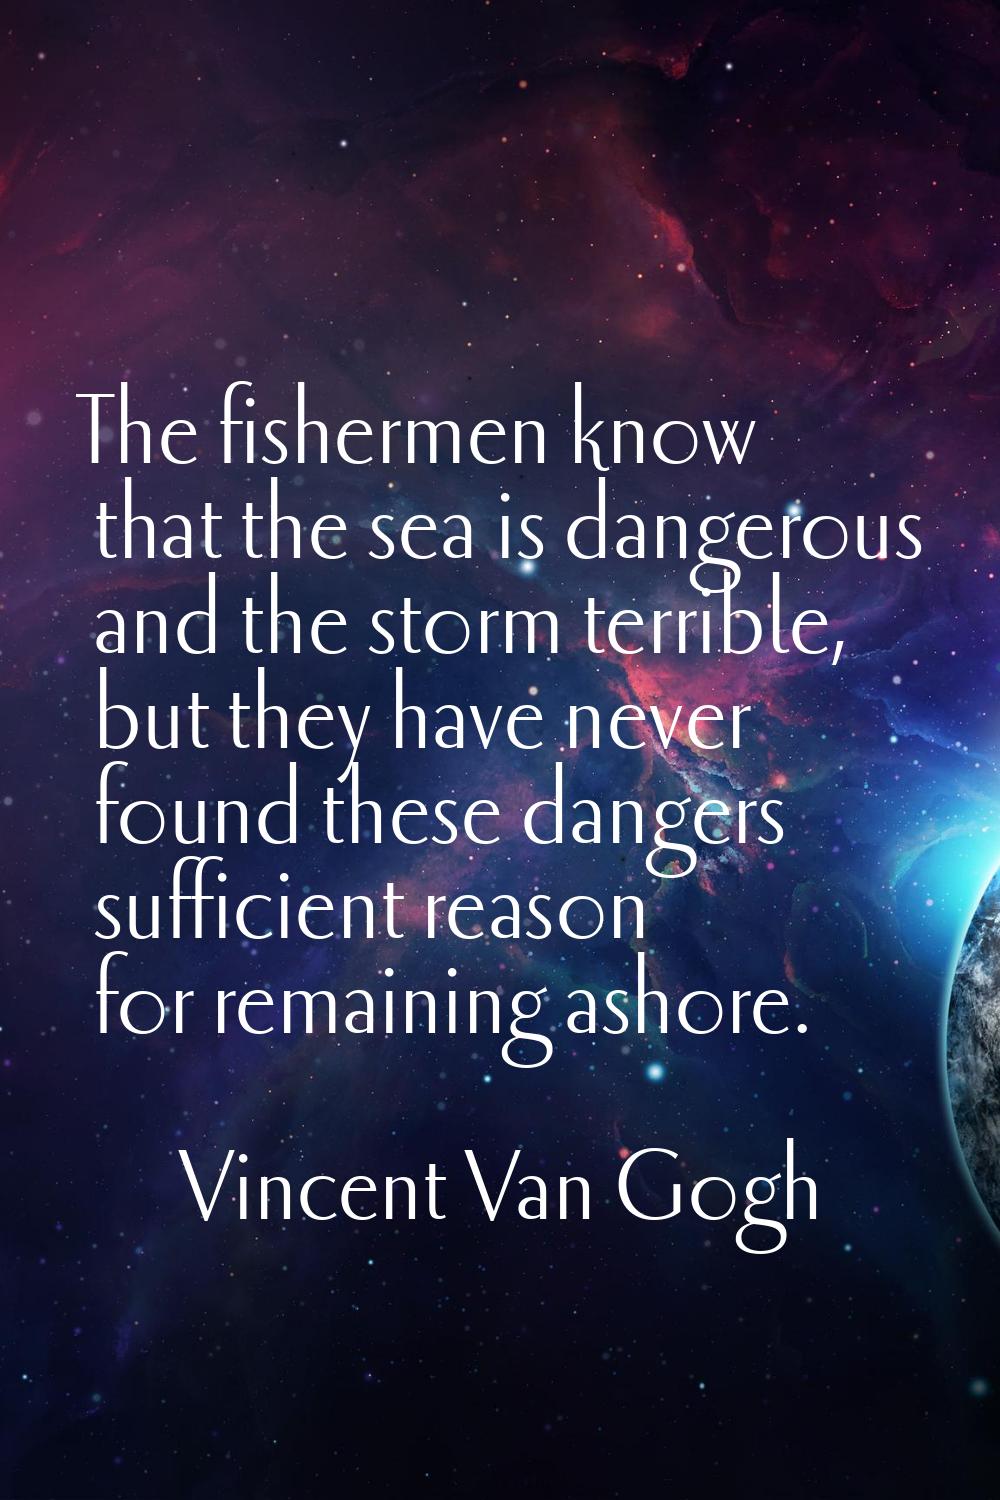 The fishermen know that the sea is dangerous and the storm terrible, but they have never found thes